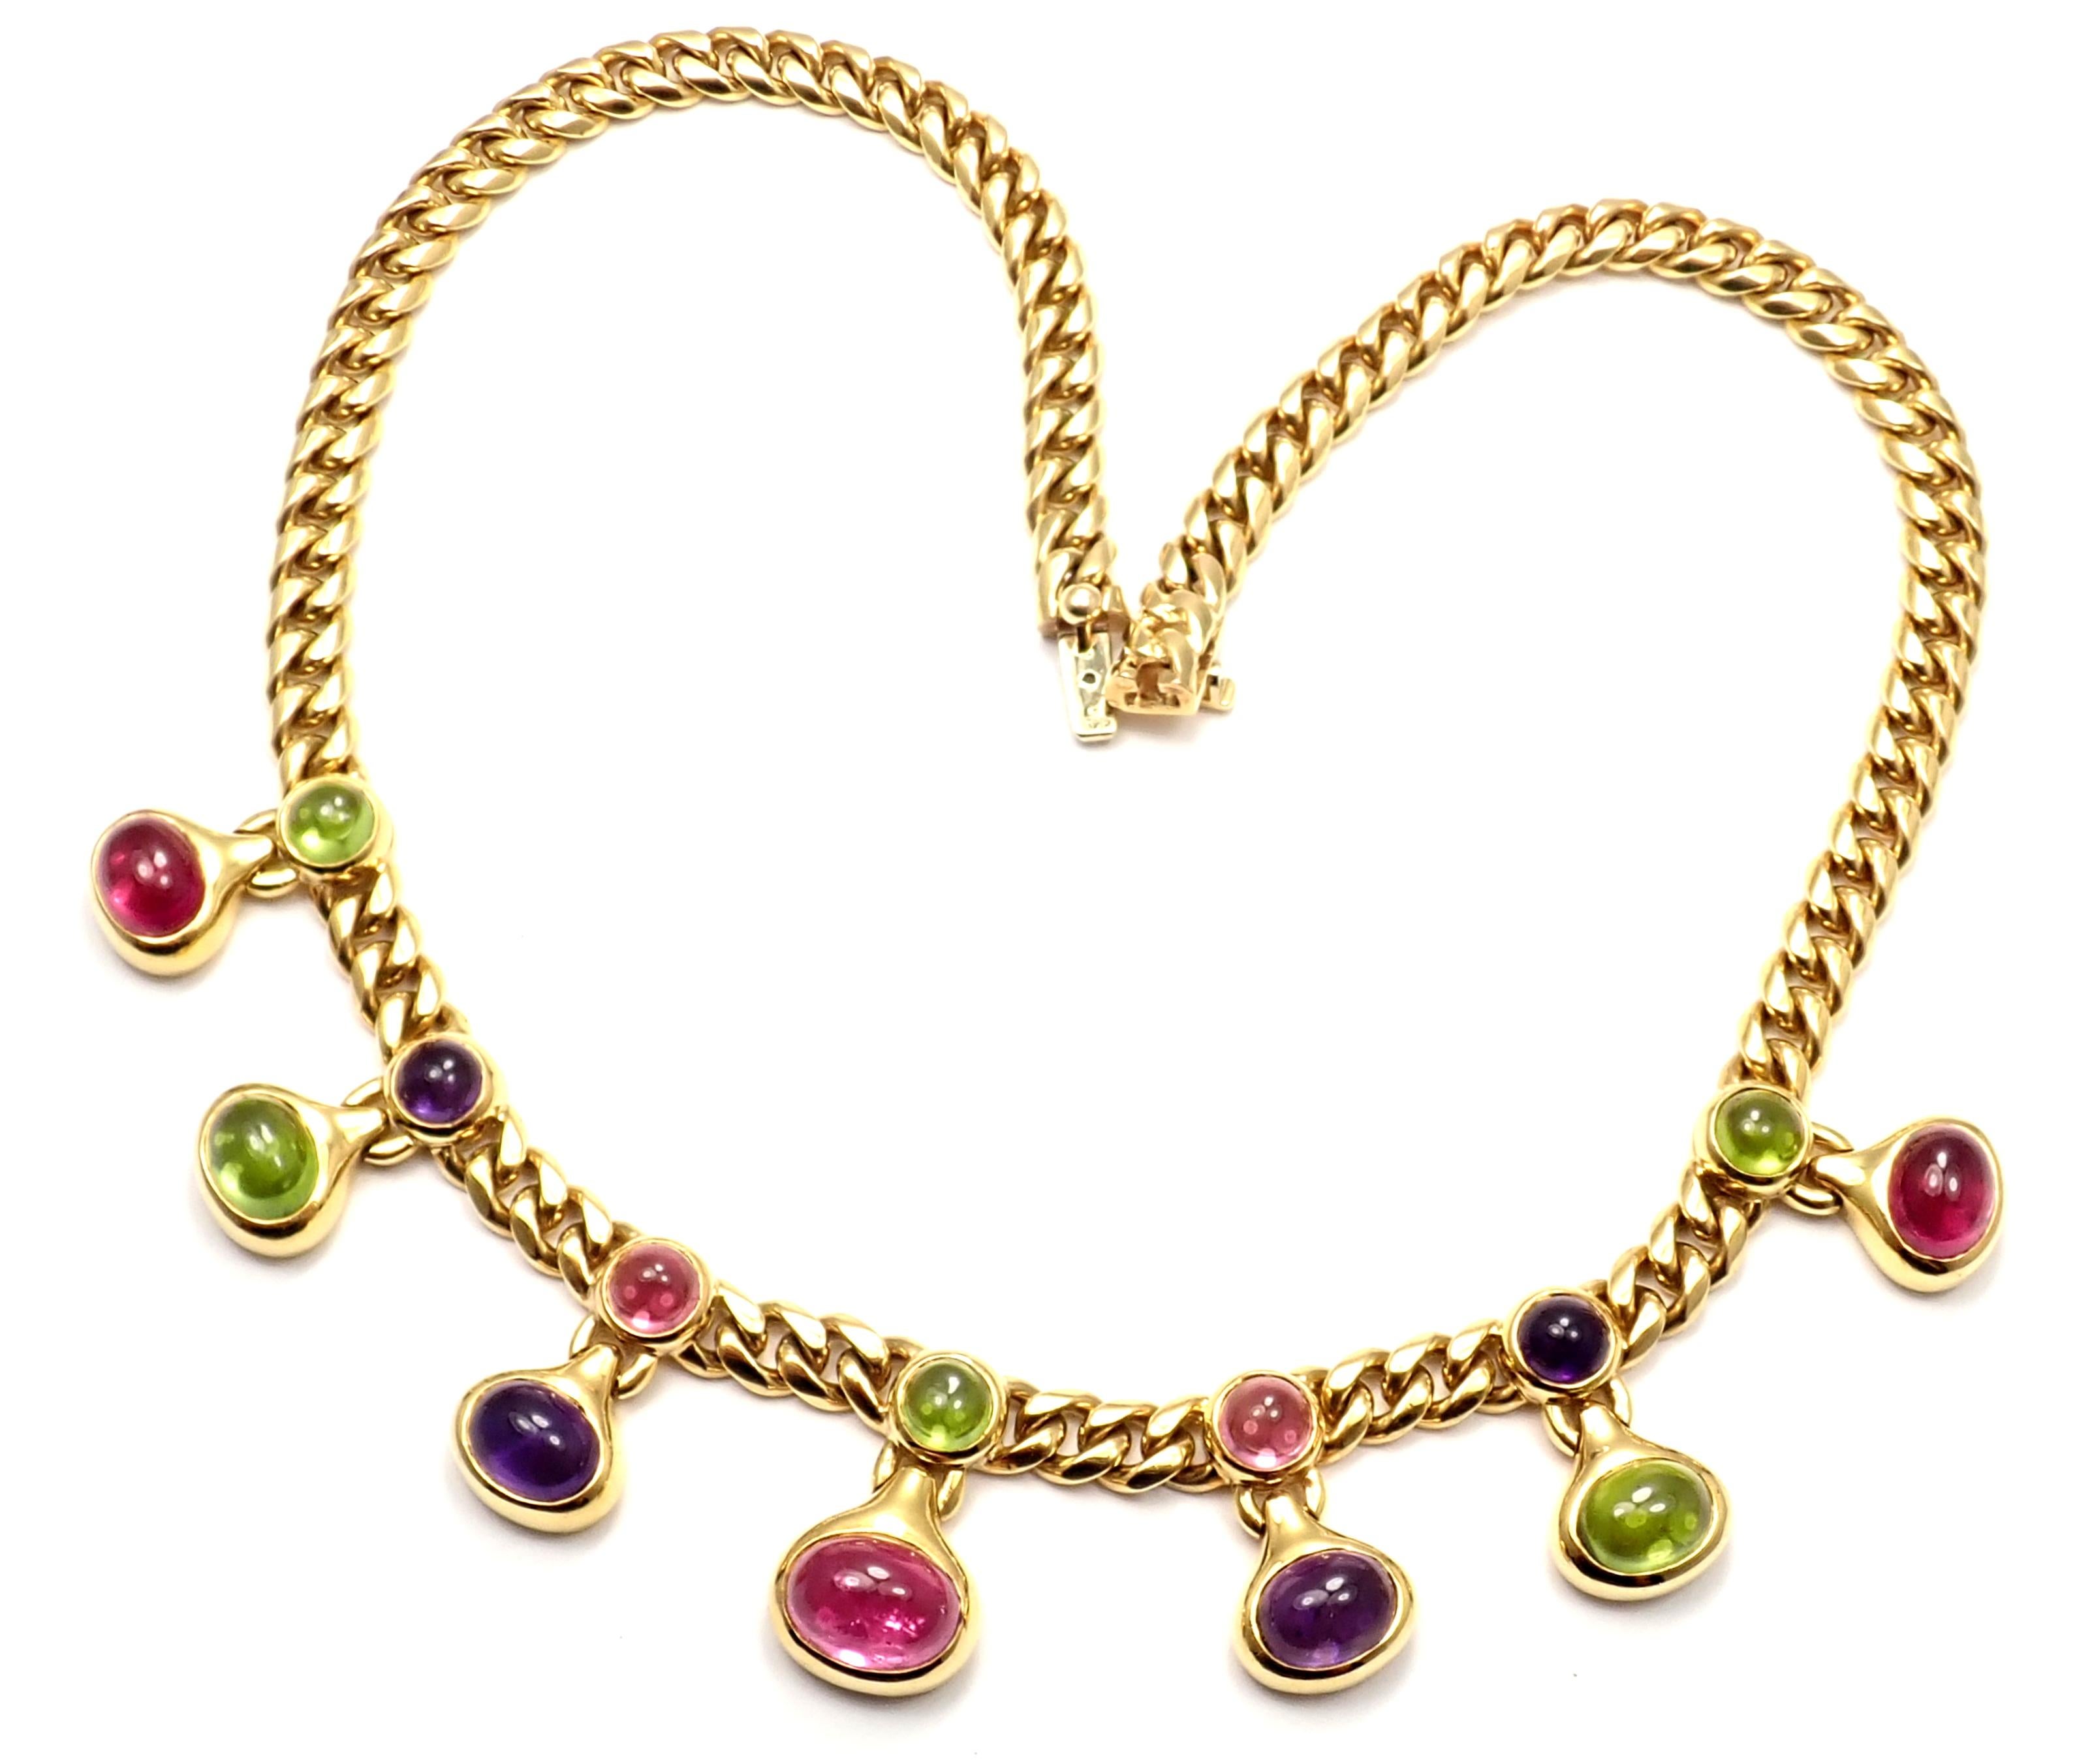 18k Yellow Gold Peridot, Amethyst and Pink Tourmaline Link Necklace by Bulgari. 
With 4 amethysts, 5 peridots, 5 pink  tourmalines.
Details: 
Length: 16